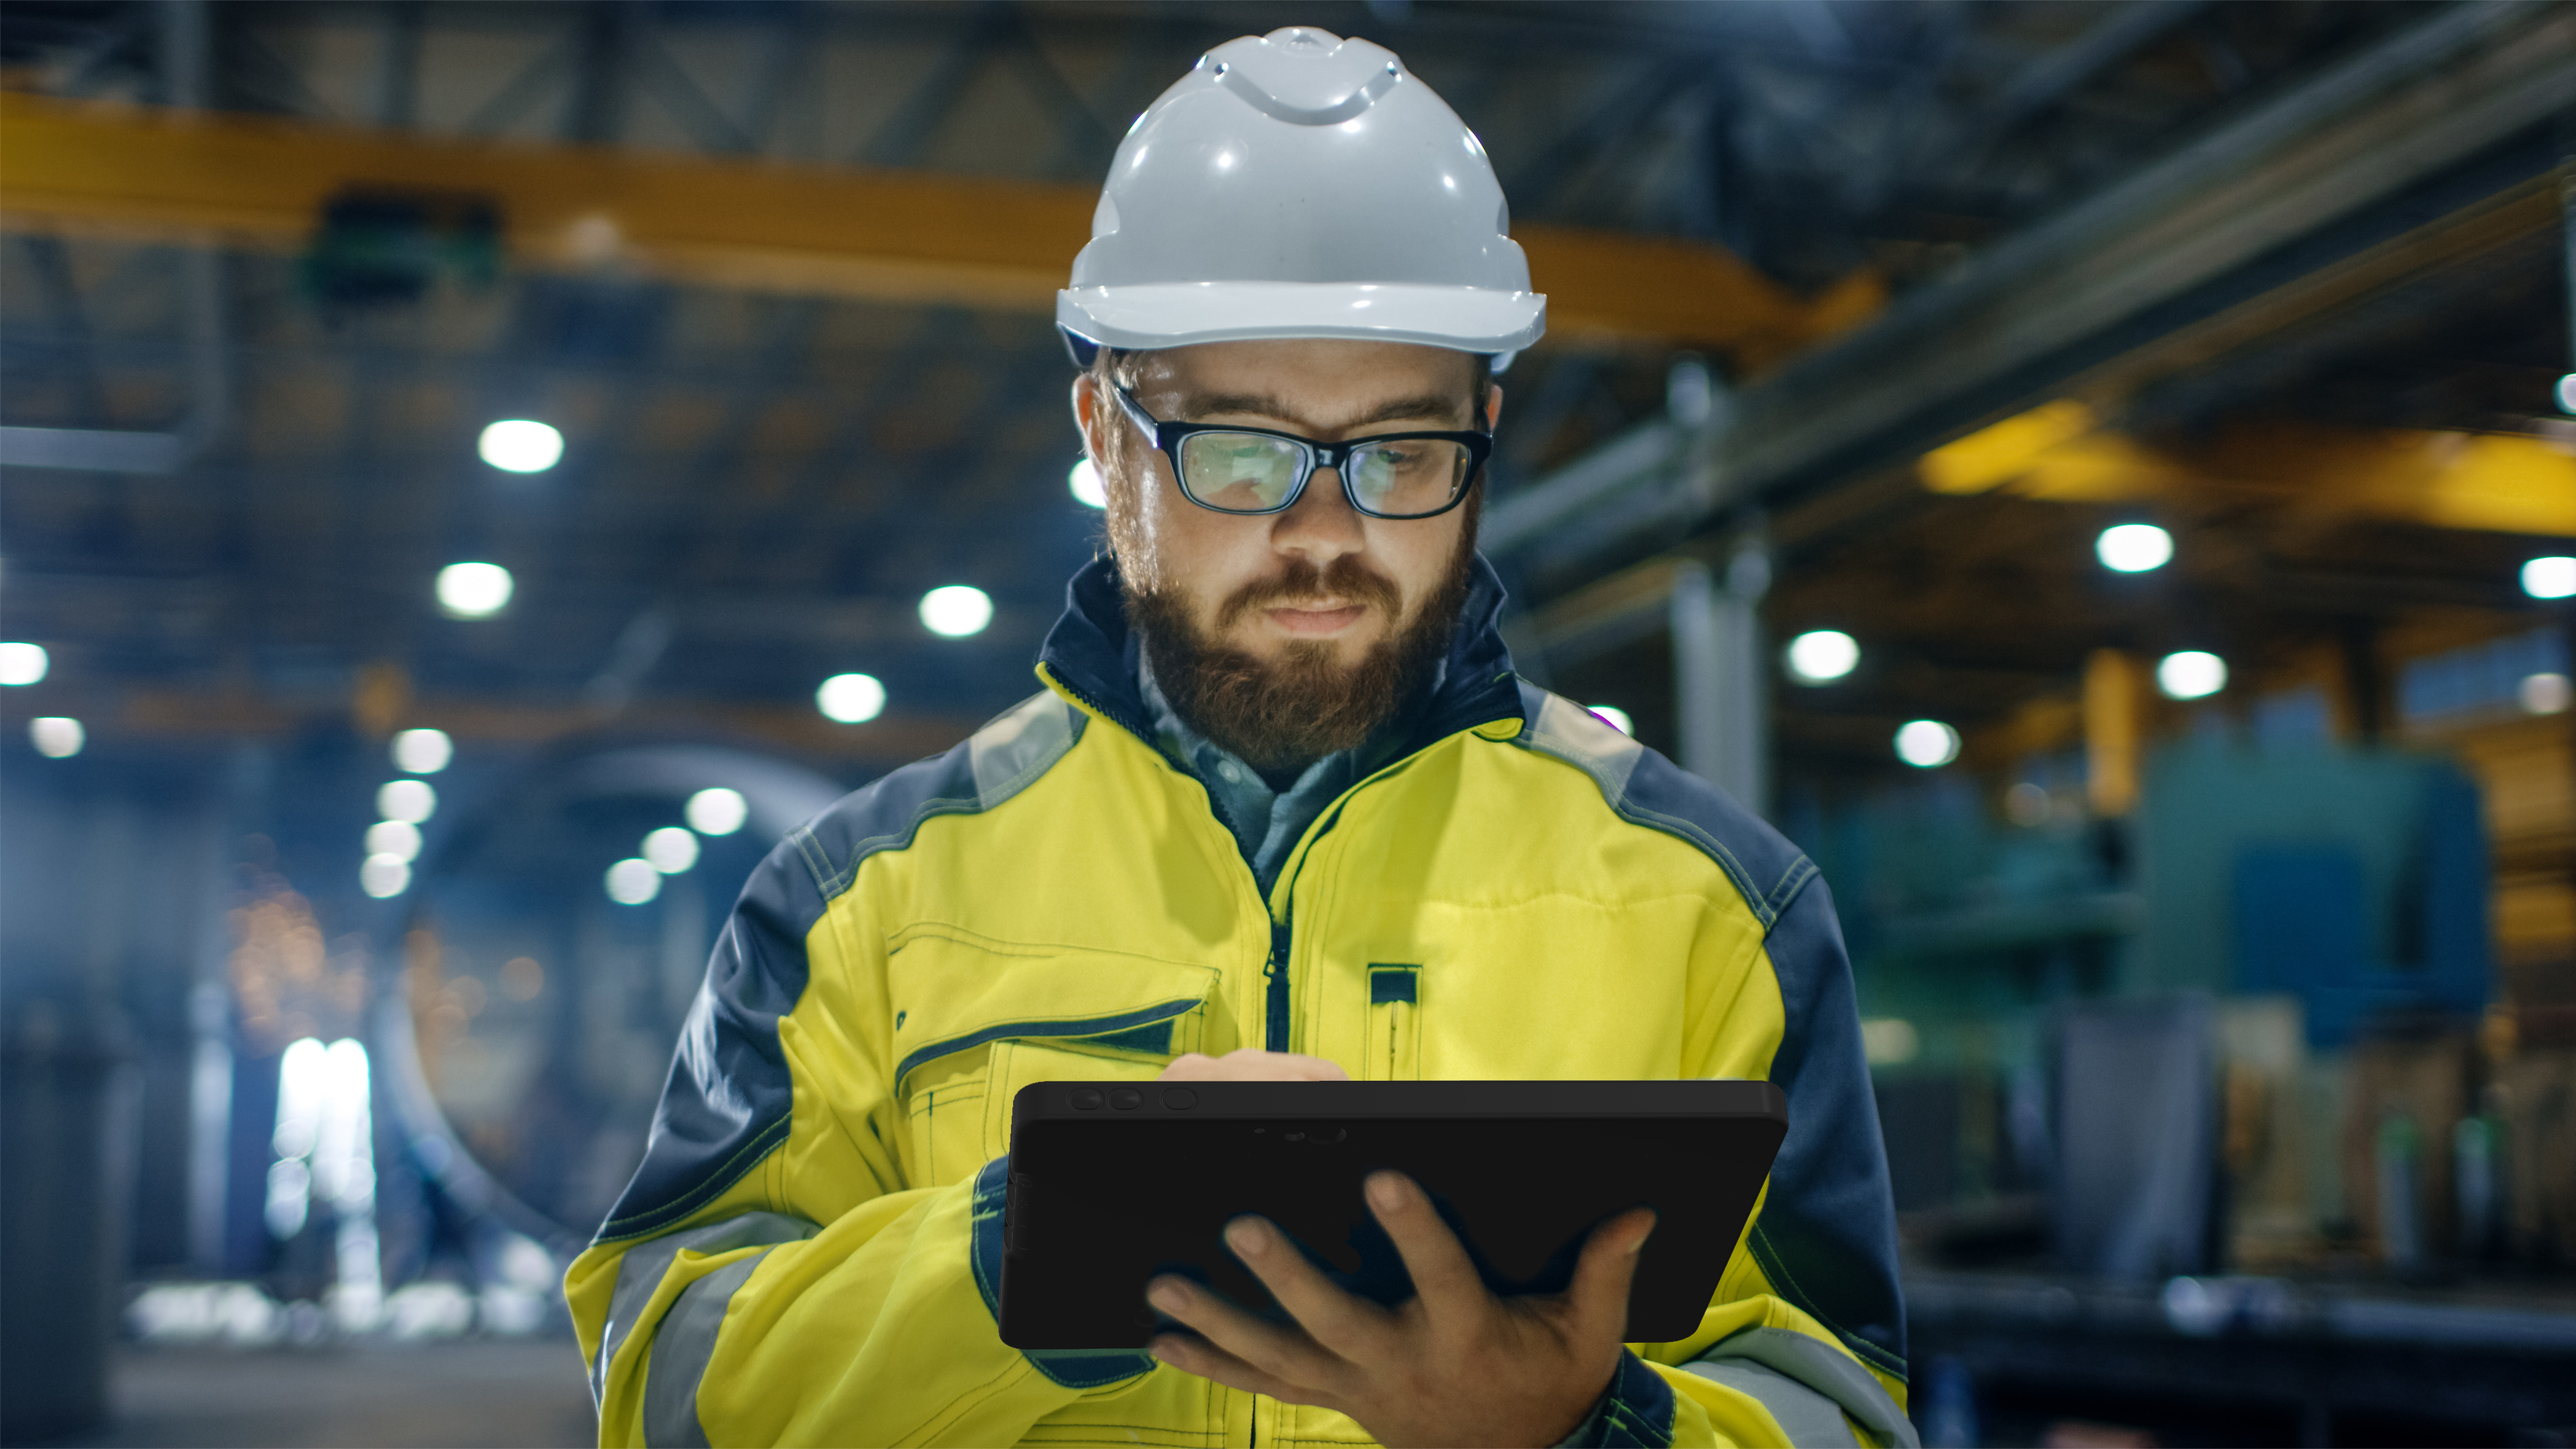 Integrating Manufacturing Field Workers with Certified Technologies